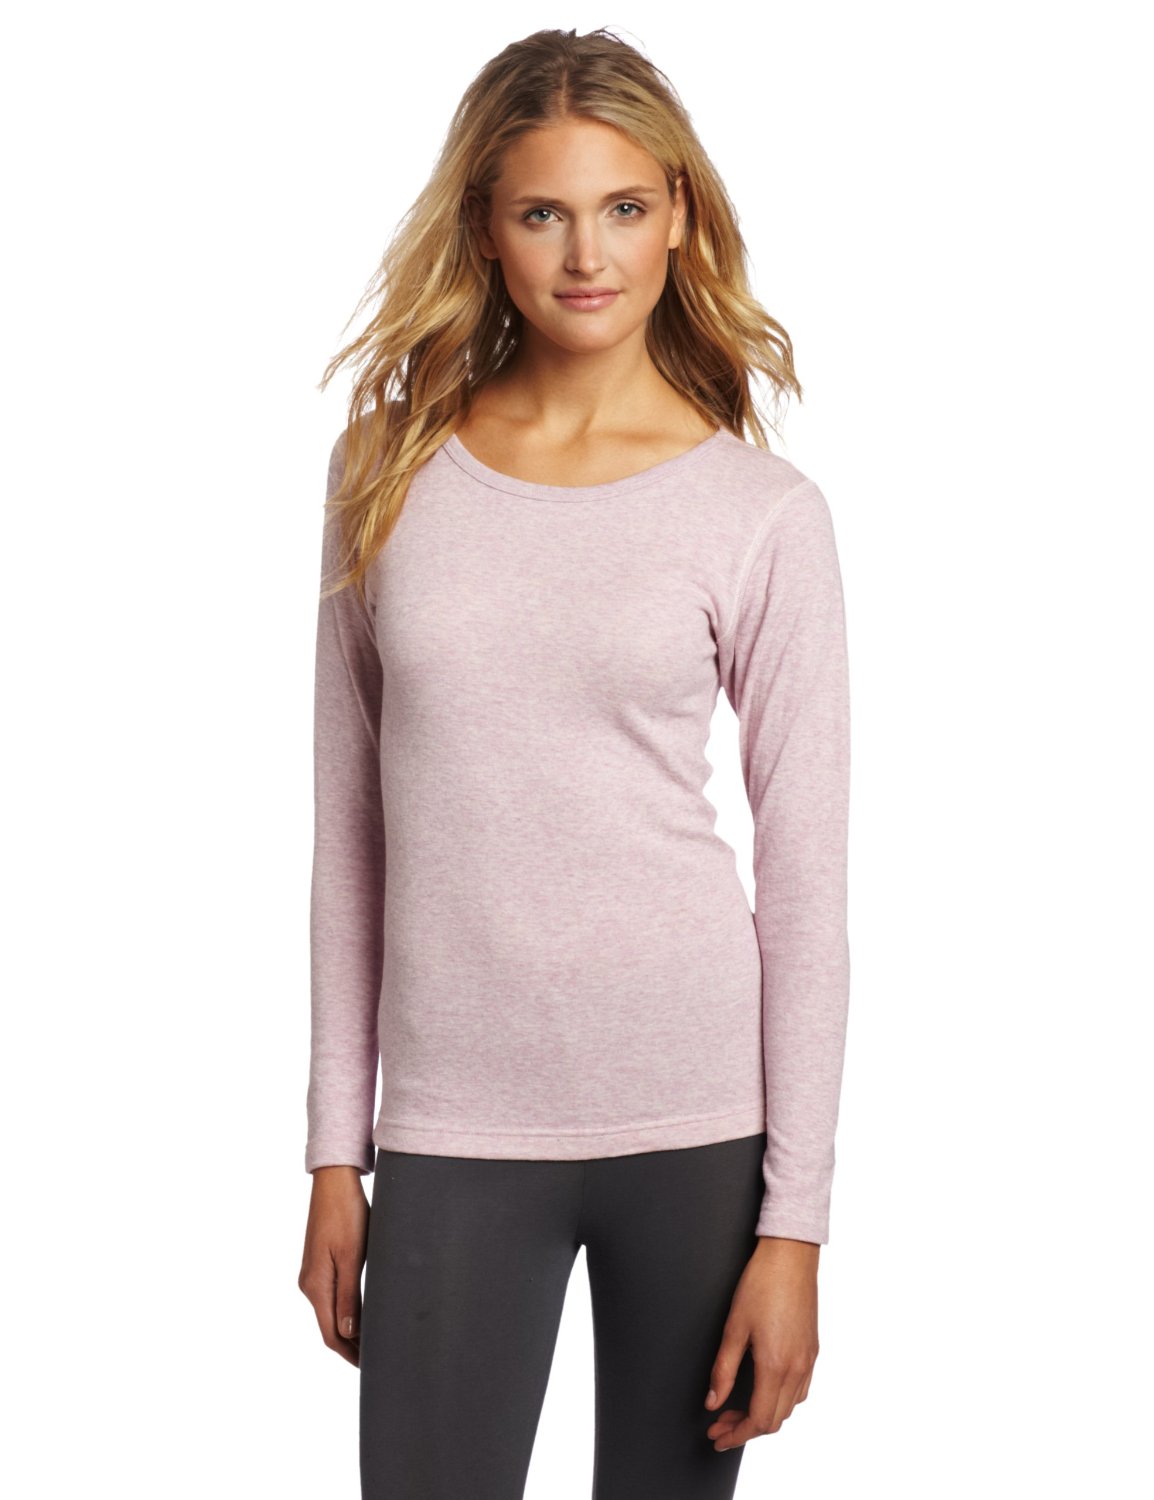 Baselayer women's thermal underwear duofold orignals Duofold By